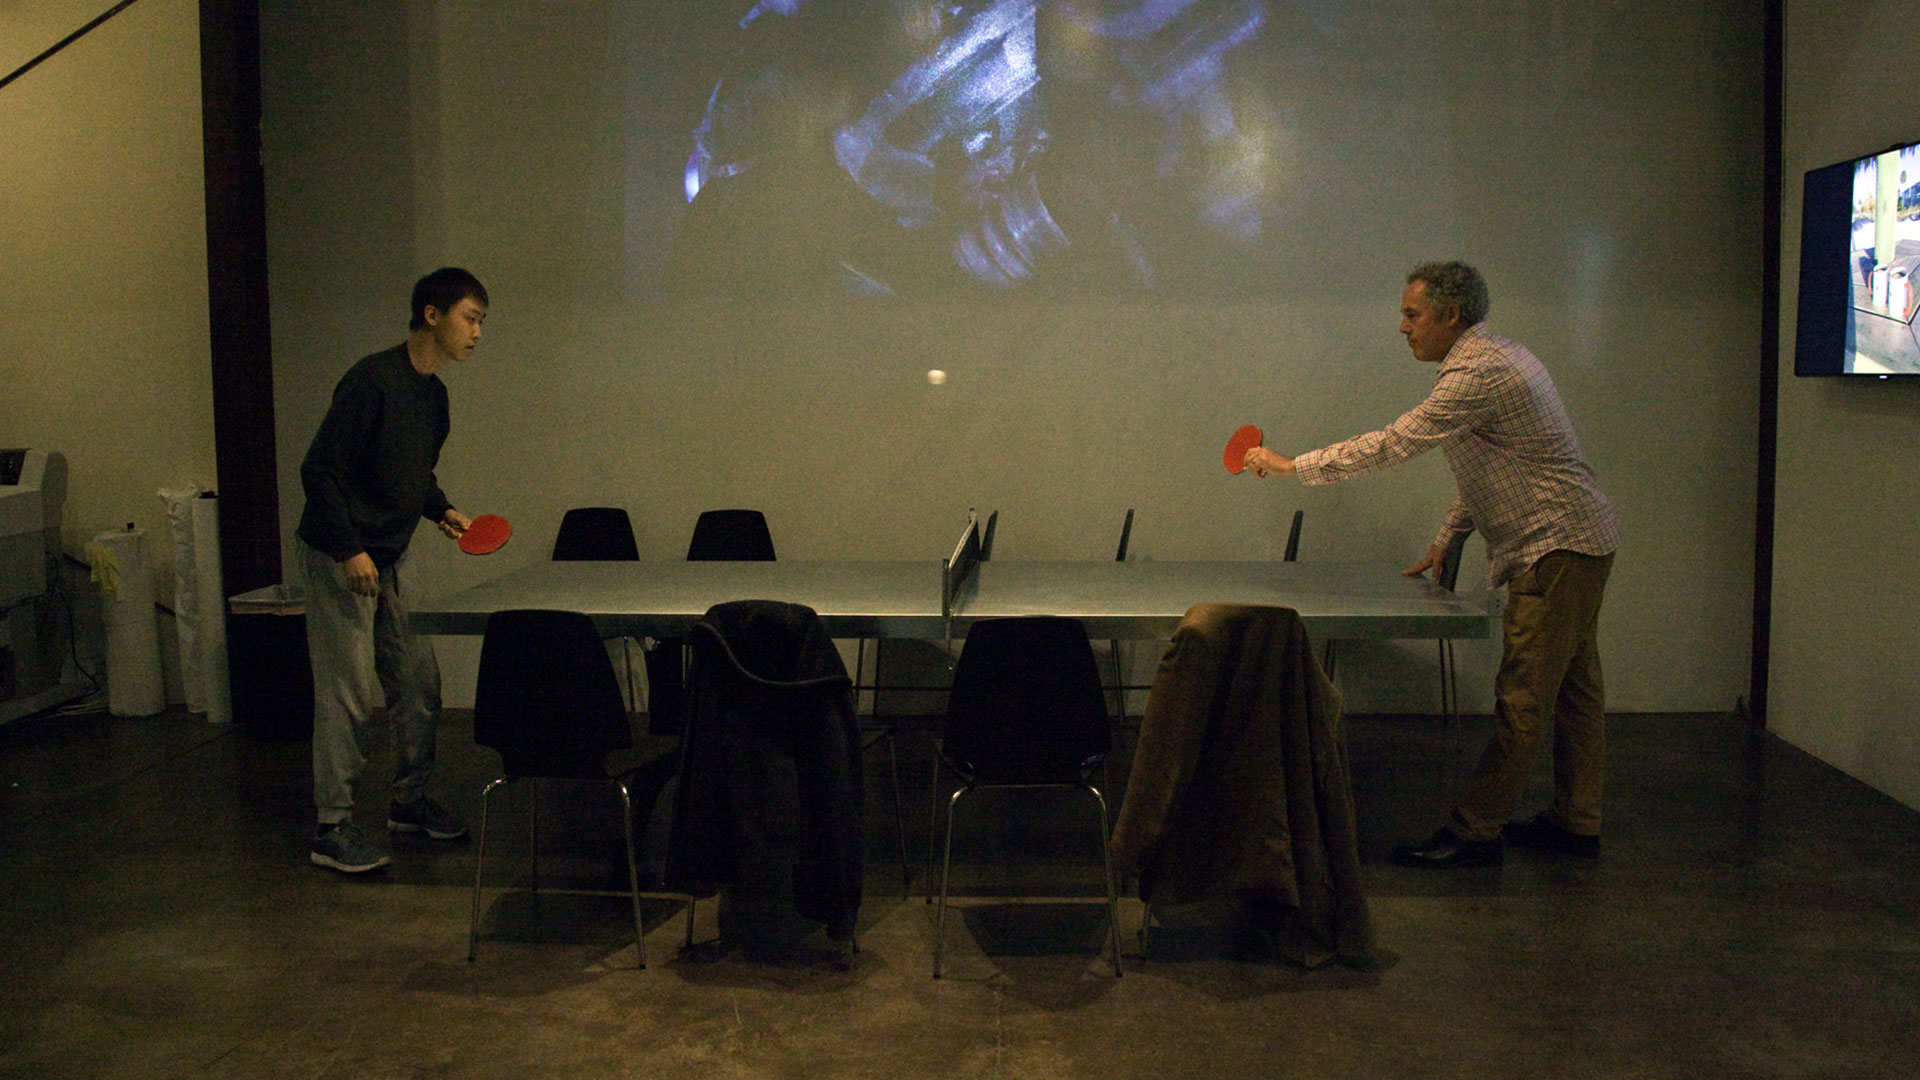 Two people playing ping pong on conference table.